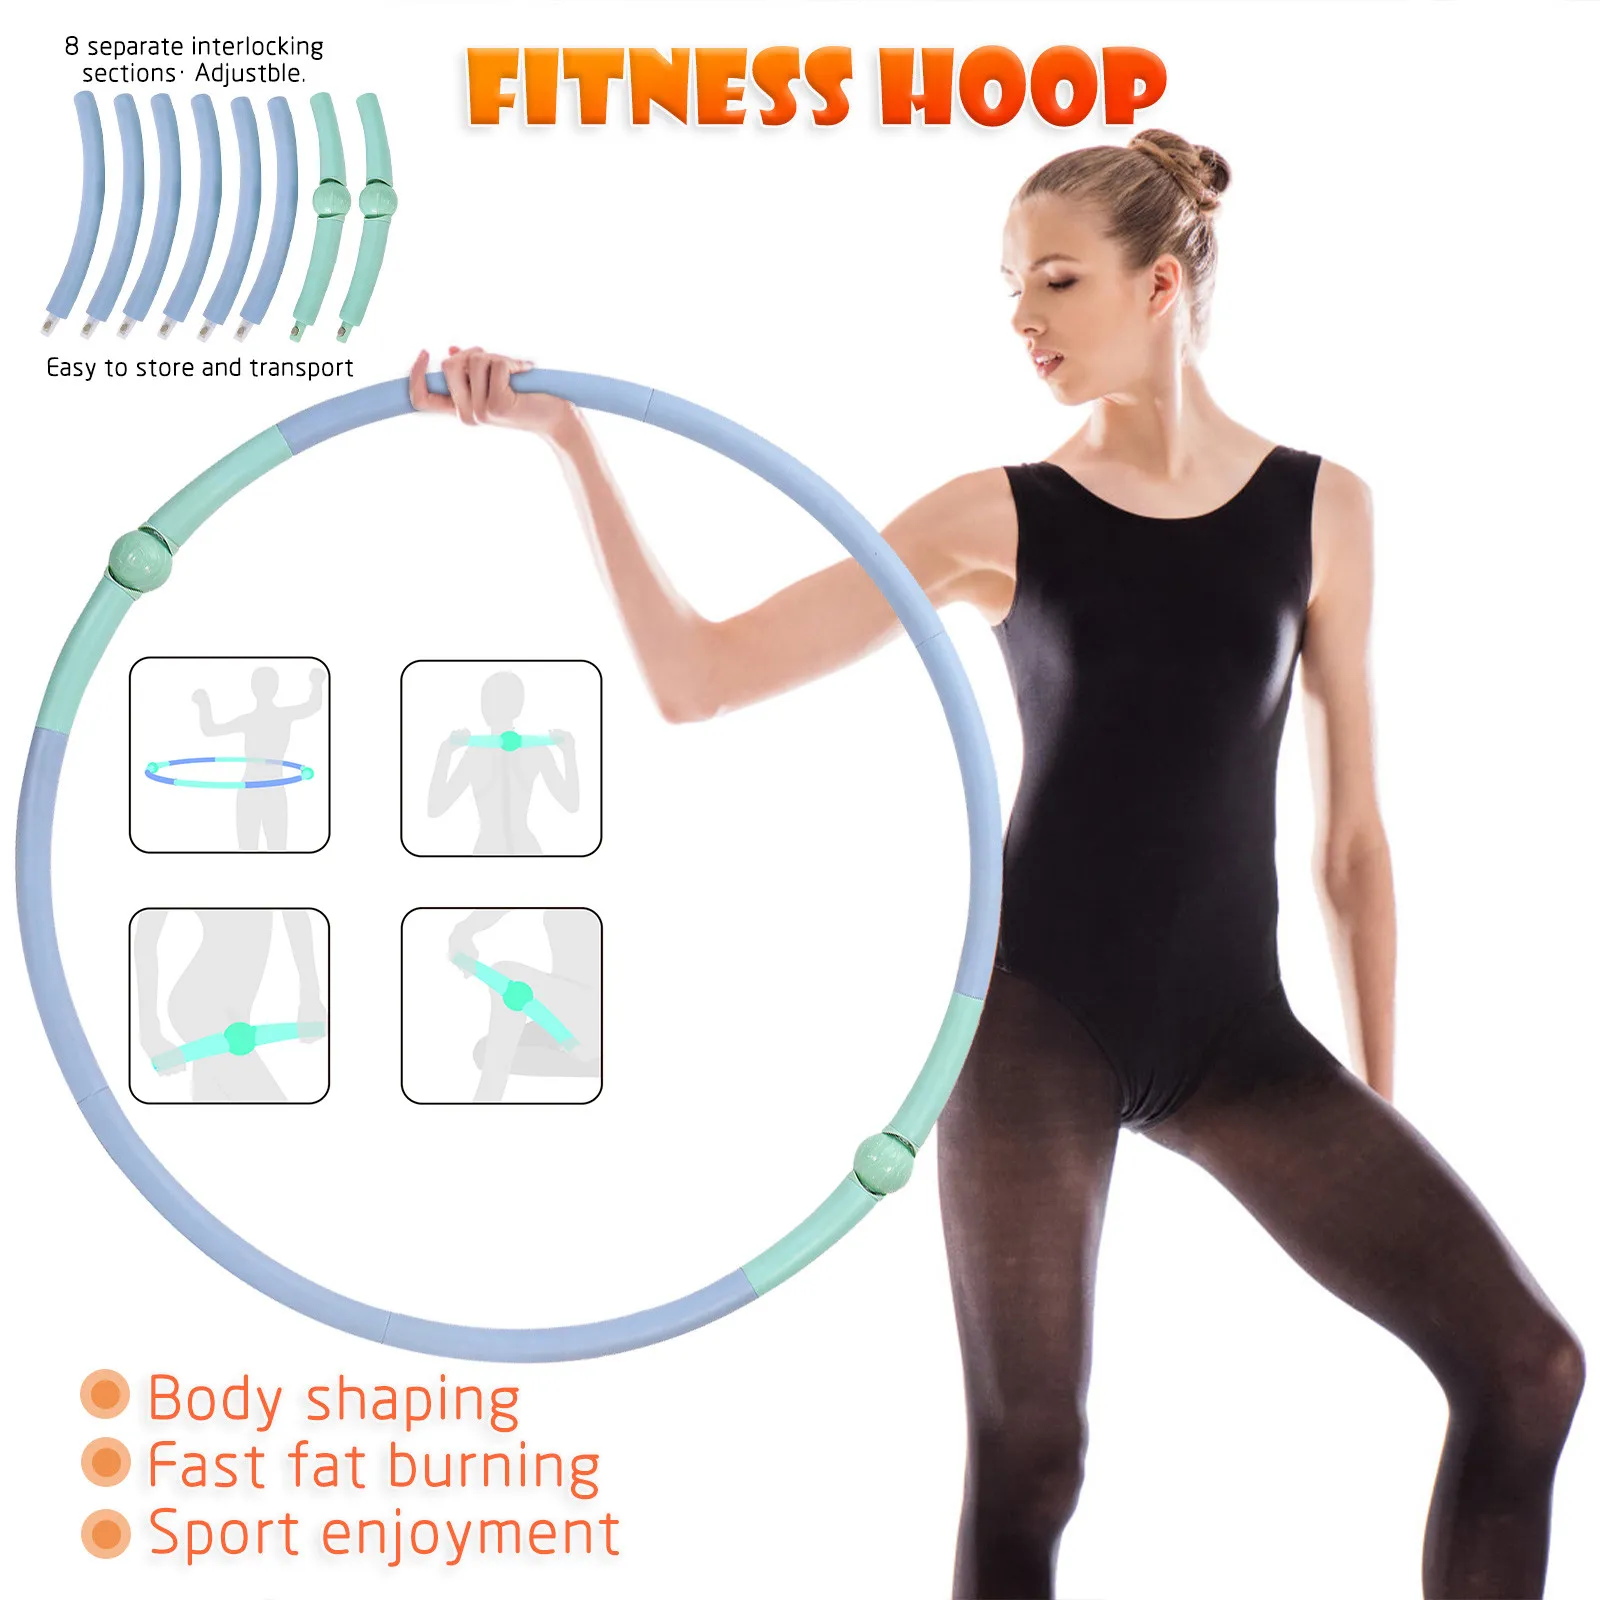 Fitness Hoop Adults Professional 8 Parts Detachable Exercise Adjustable Size Home Massage Waist Ring Yoga Weight Loss E2 | Спорт и